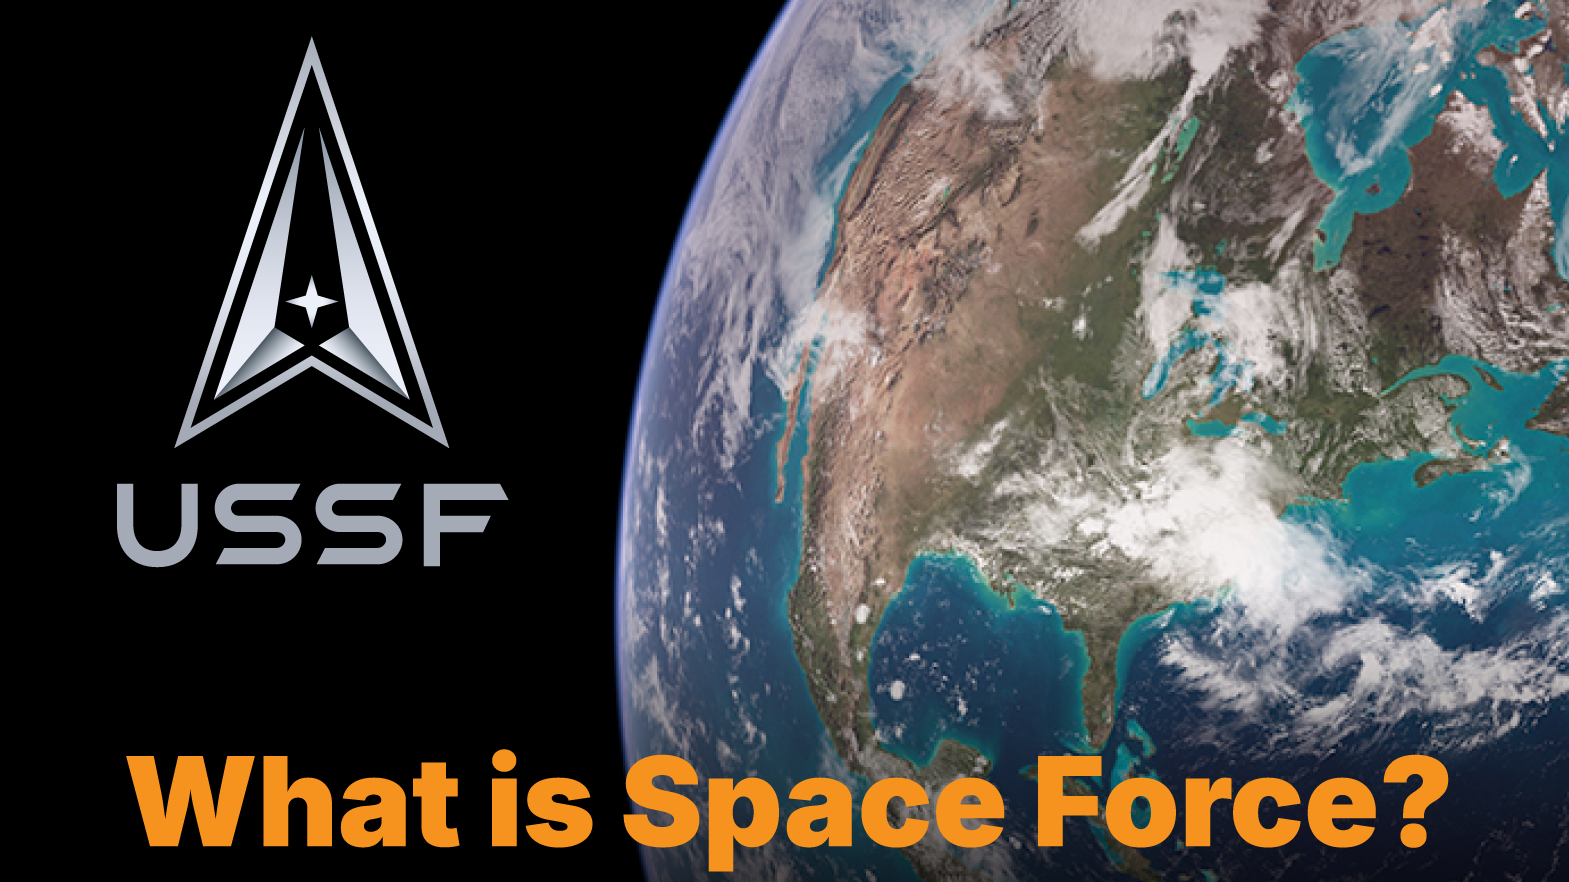 It’s the 5th anniversary of the United States Space Force, but what does it do? Space